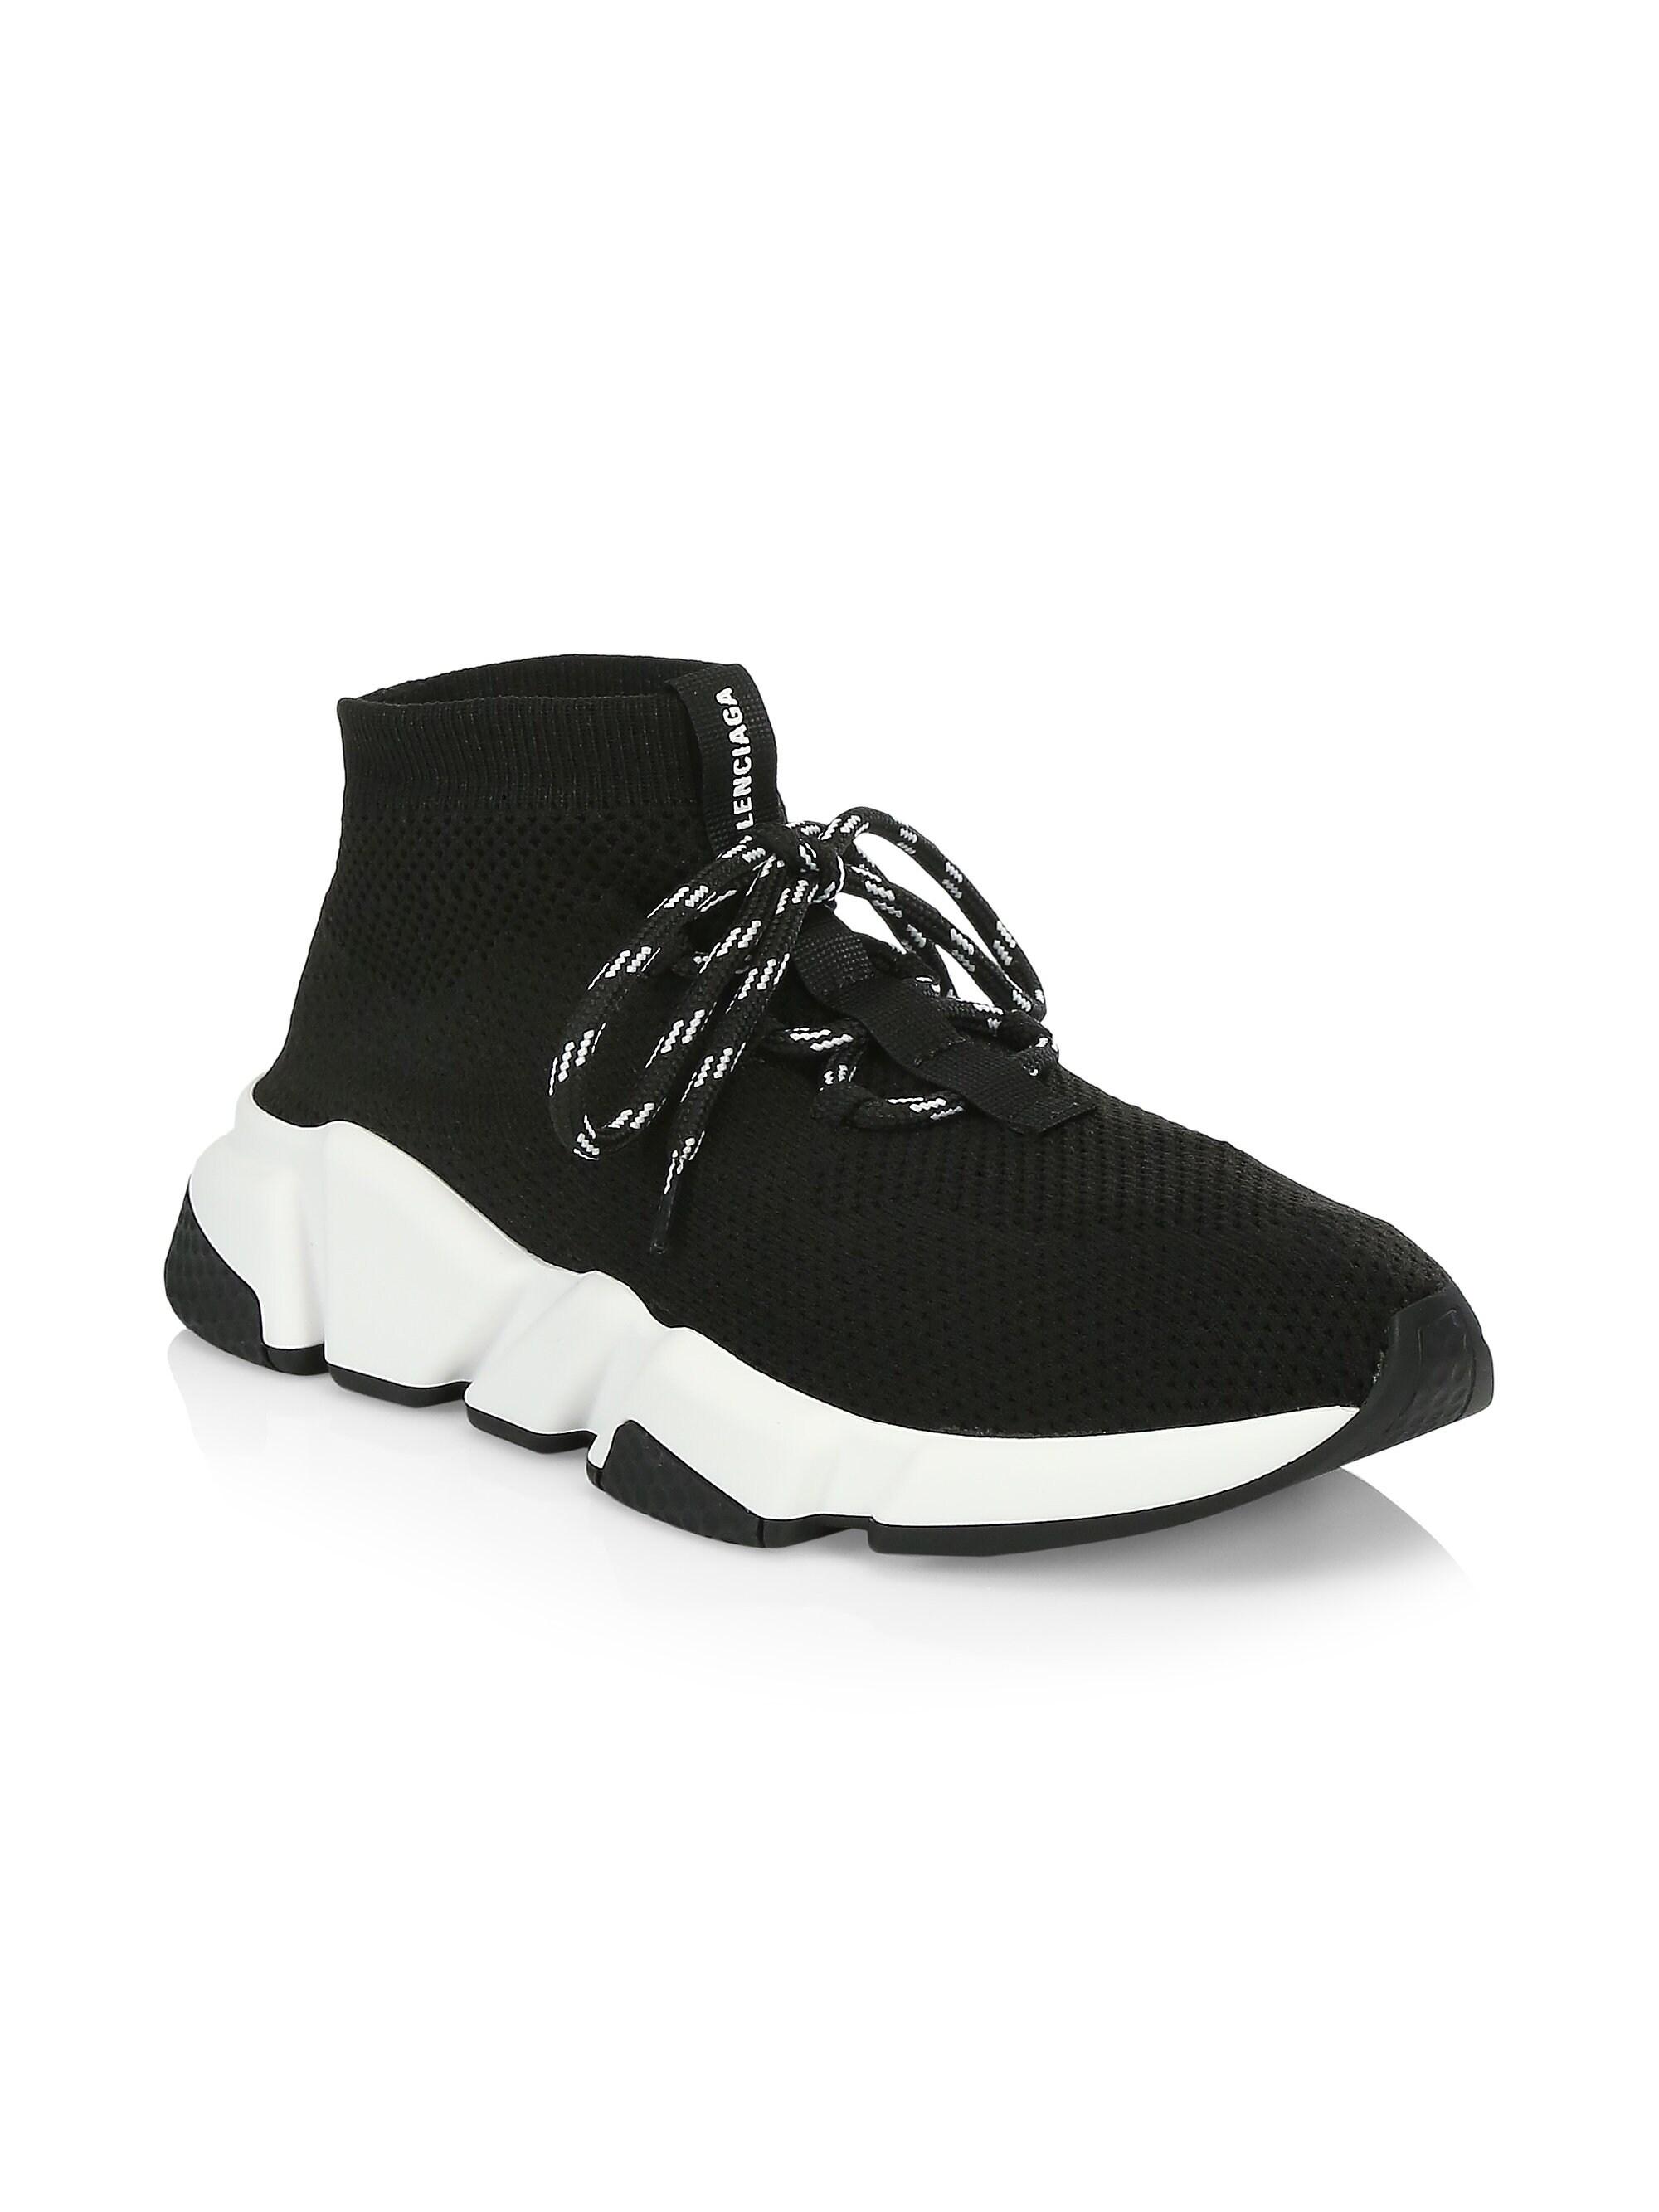 Balenciaga Synthetic Speed Lace-up Sneakers in Black - Lyst